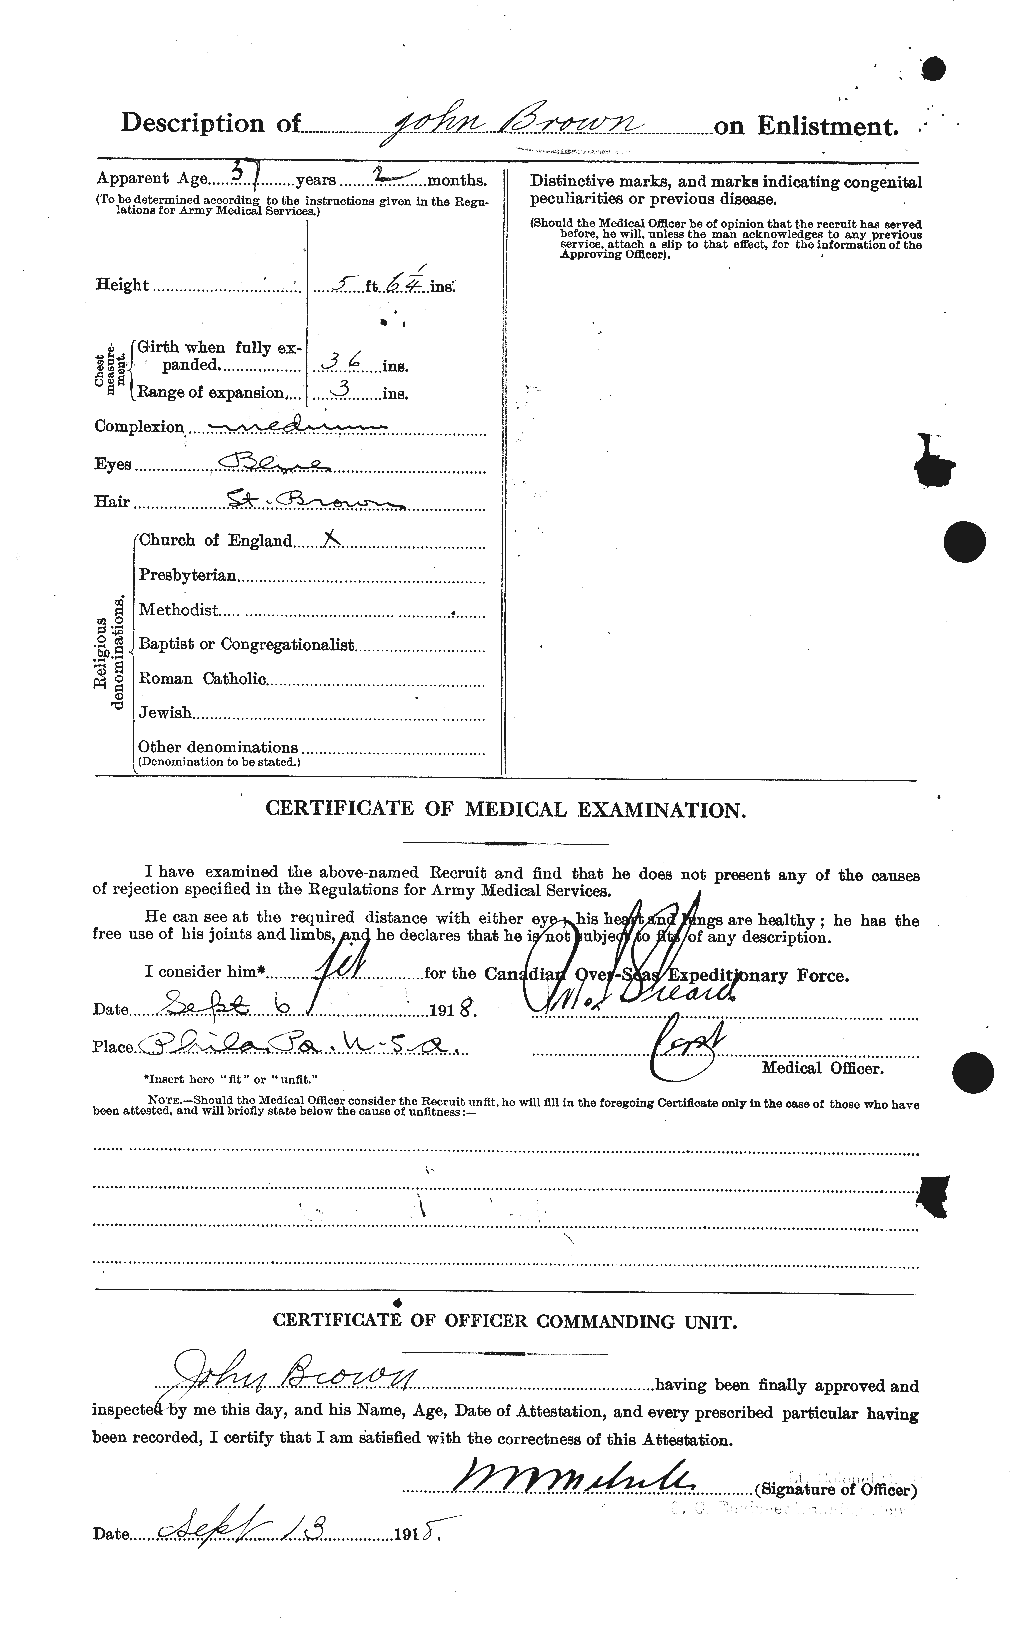 Personnel Records of the First World War - CEF 269625b